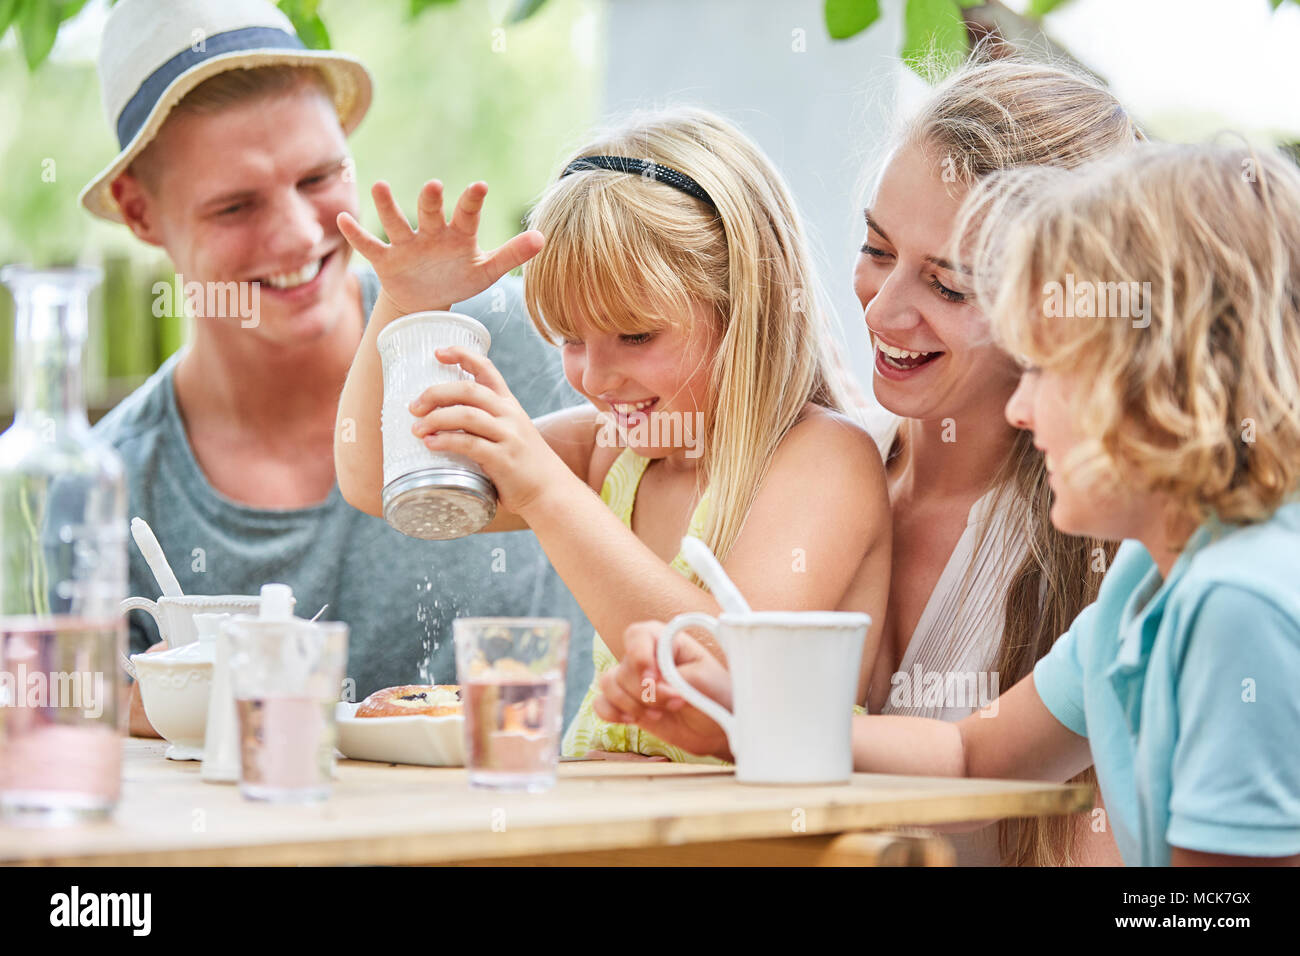 Blond girl is playing with the sugar shaker at the coffee table in the garden Stock Photo